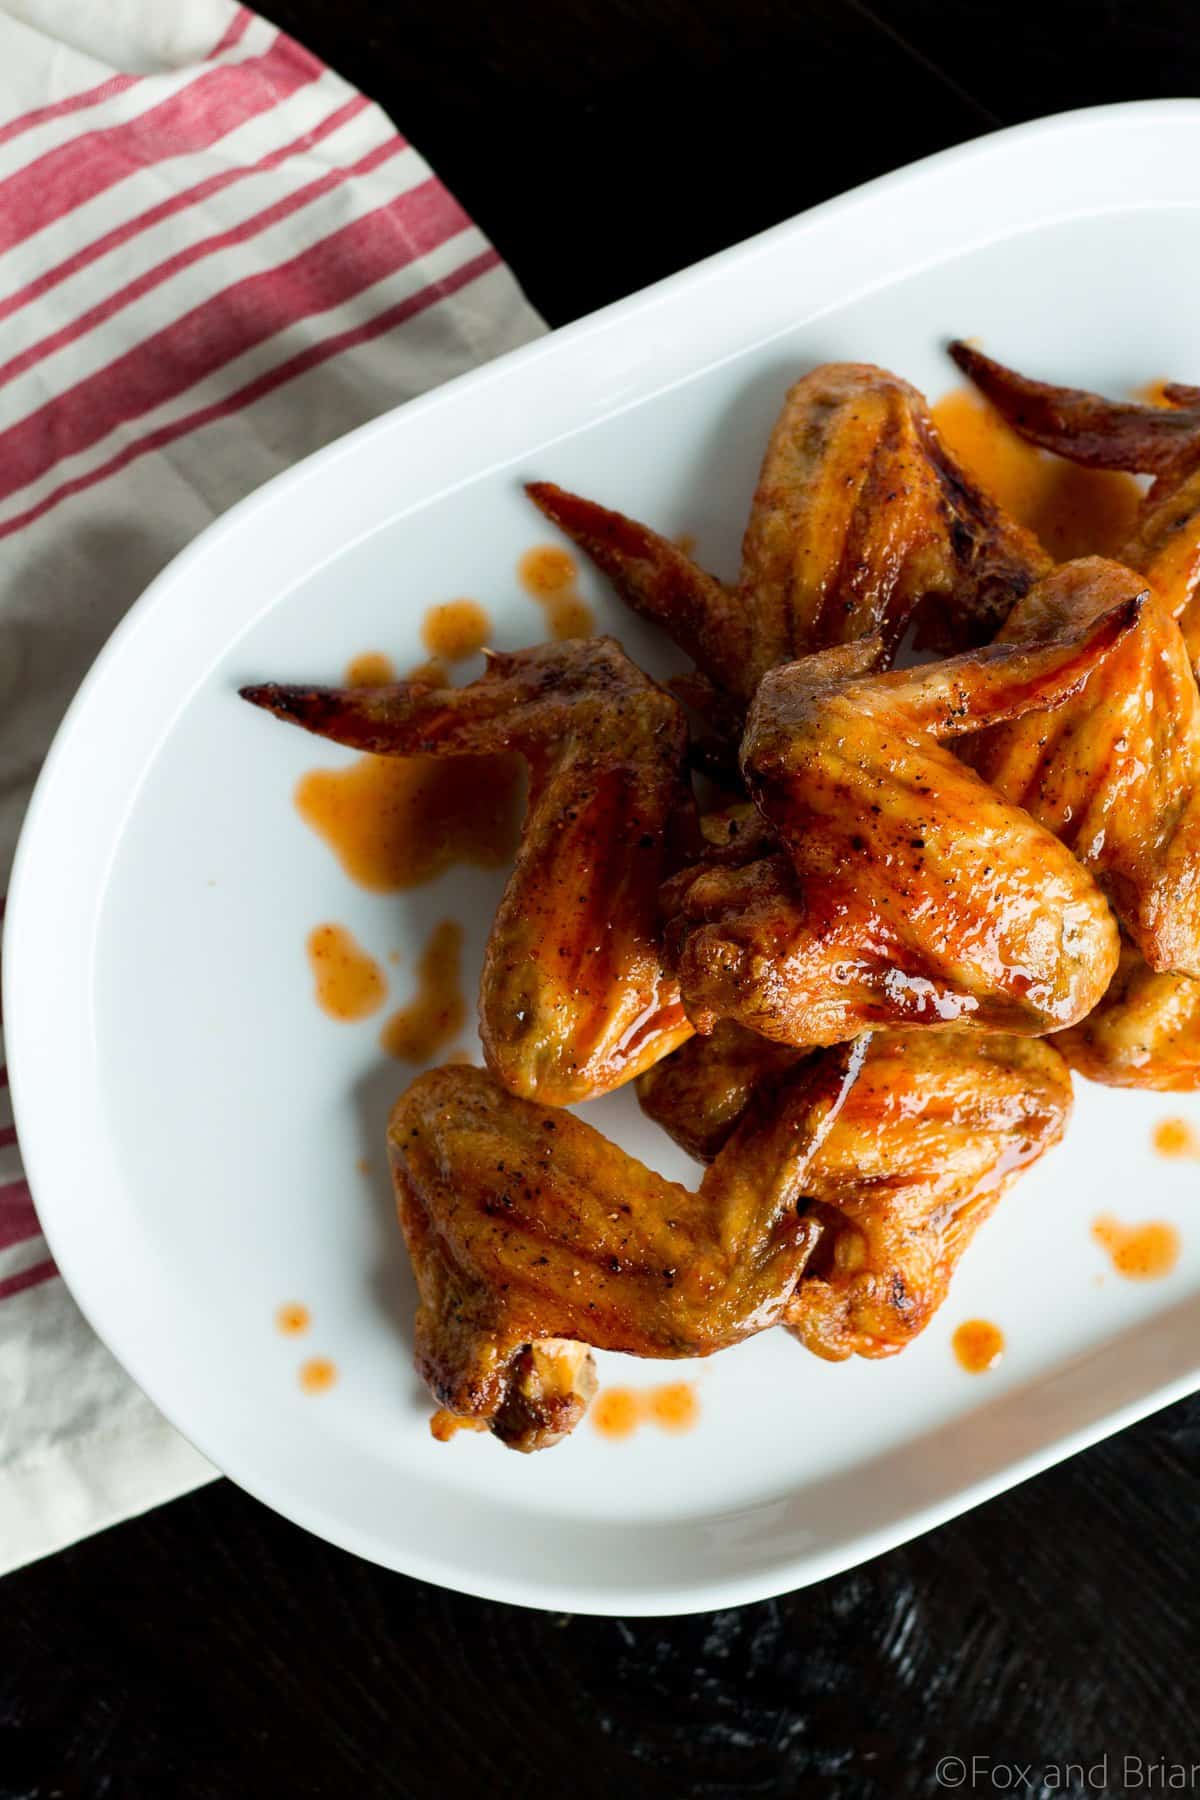 These Sriracha Brown Sugar Baked Wings are a little sweet, a little spicy and a little tangy. They get amazingly crispy in the oven, then finish with the sriracha brown sugar glaze that is totally mouthwatering and addictive!